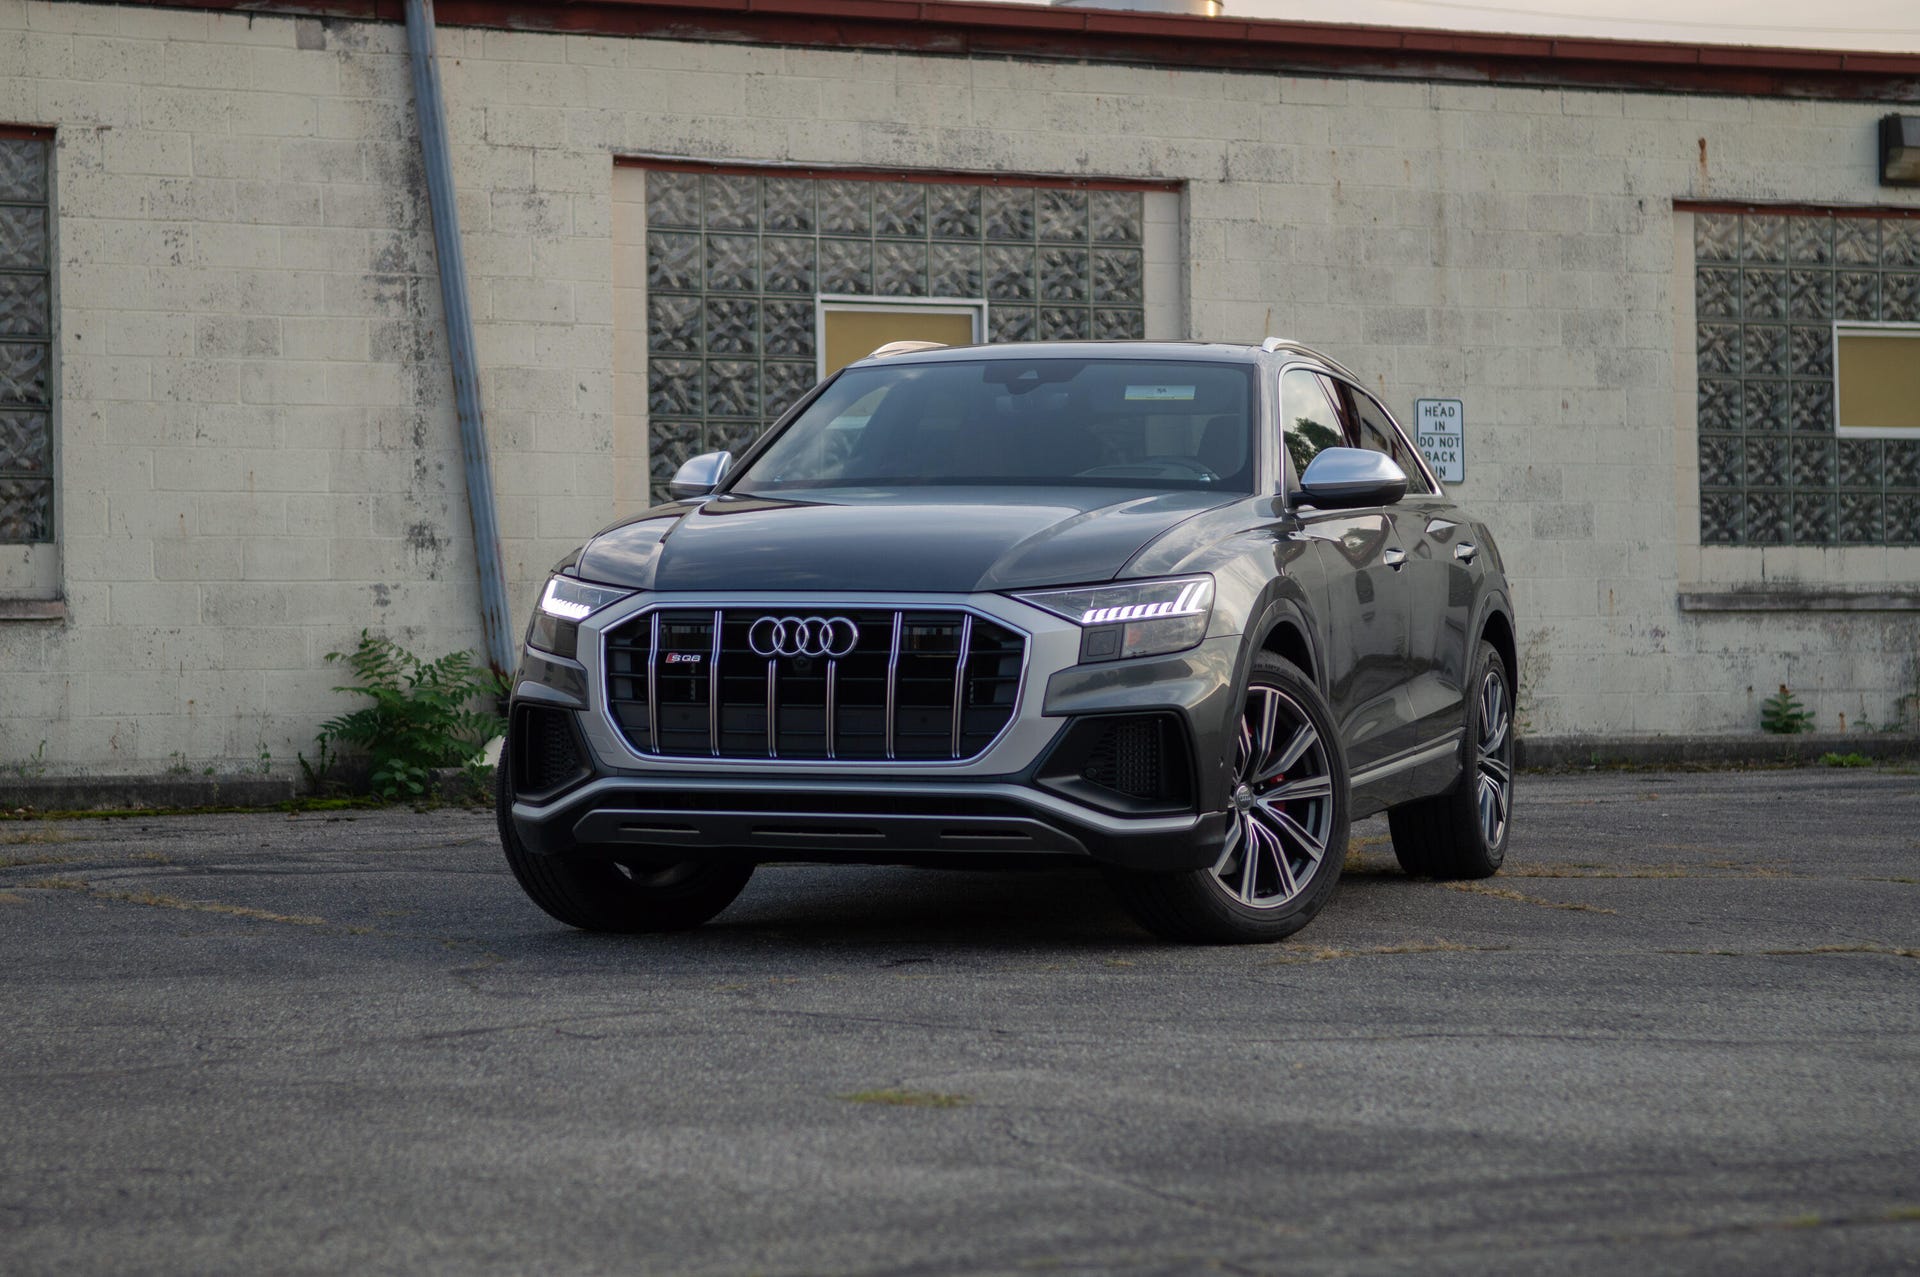 2020 Audi SQ8 review: Leather-lined linebacker - CNET